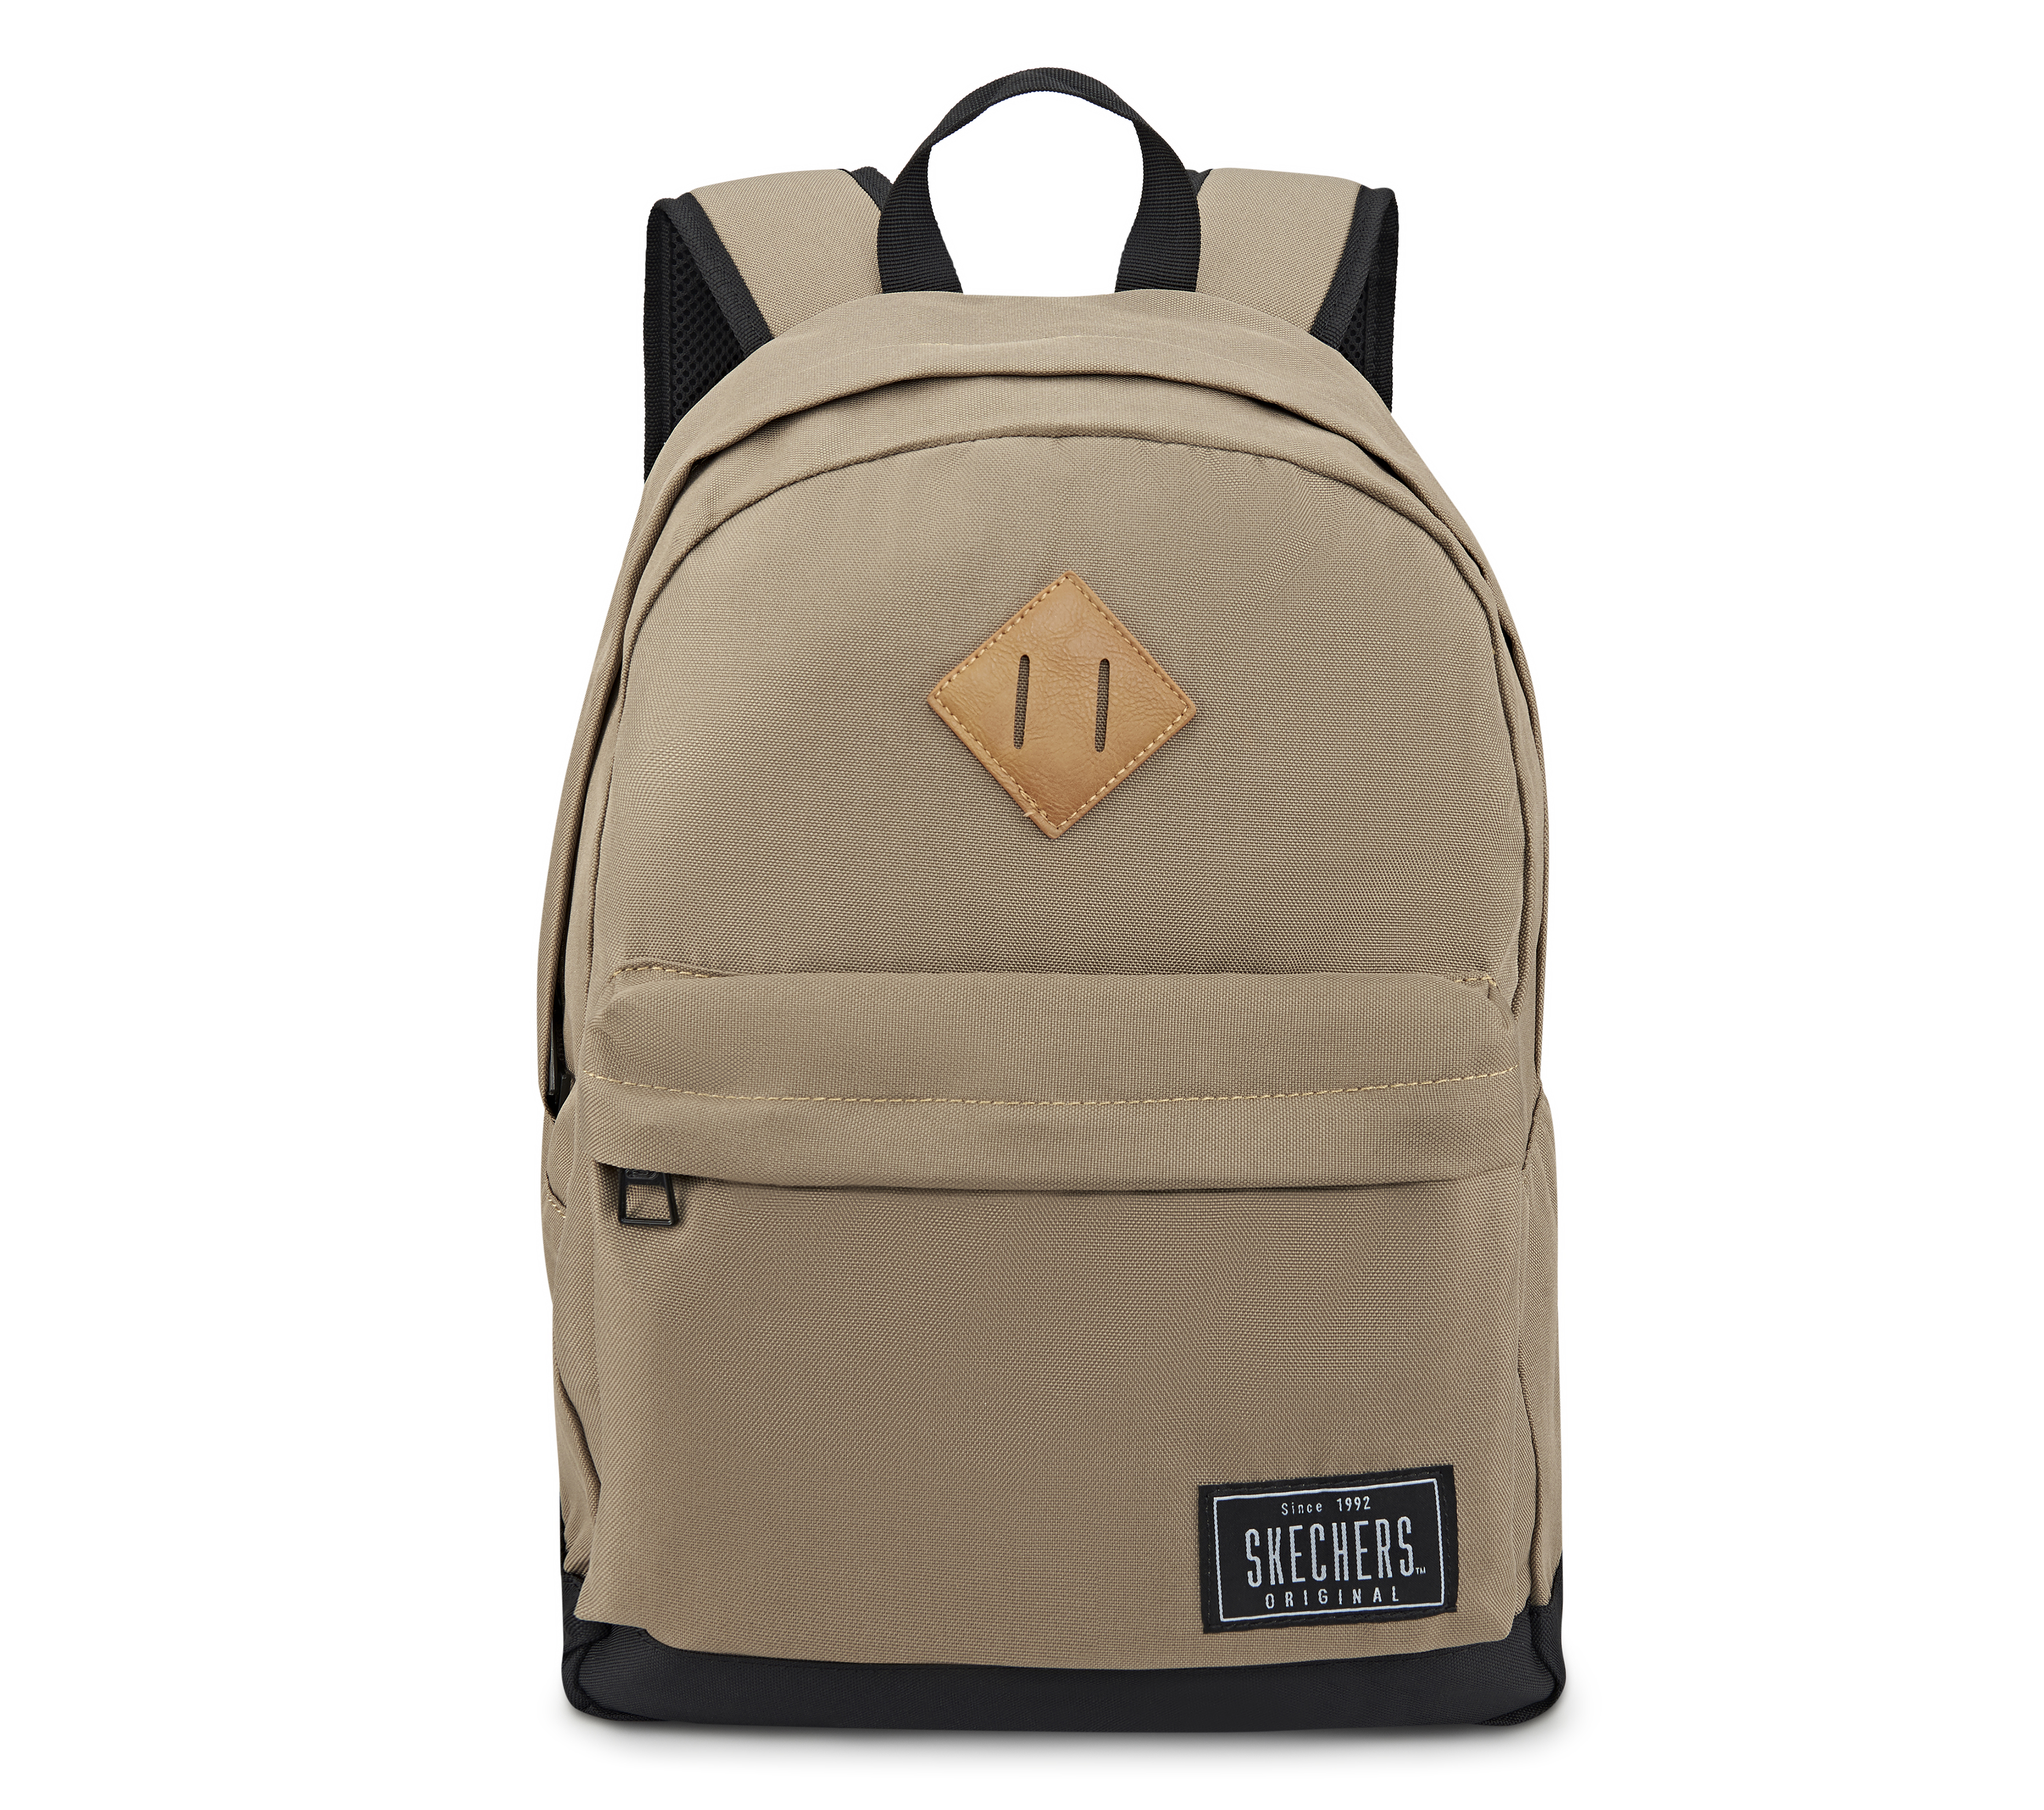 BACKPACK, BROWN Accessories Lateral View